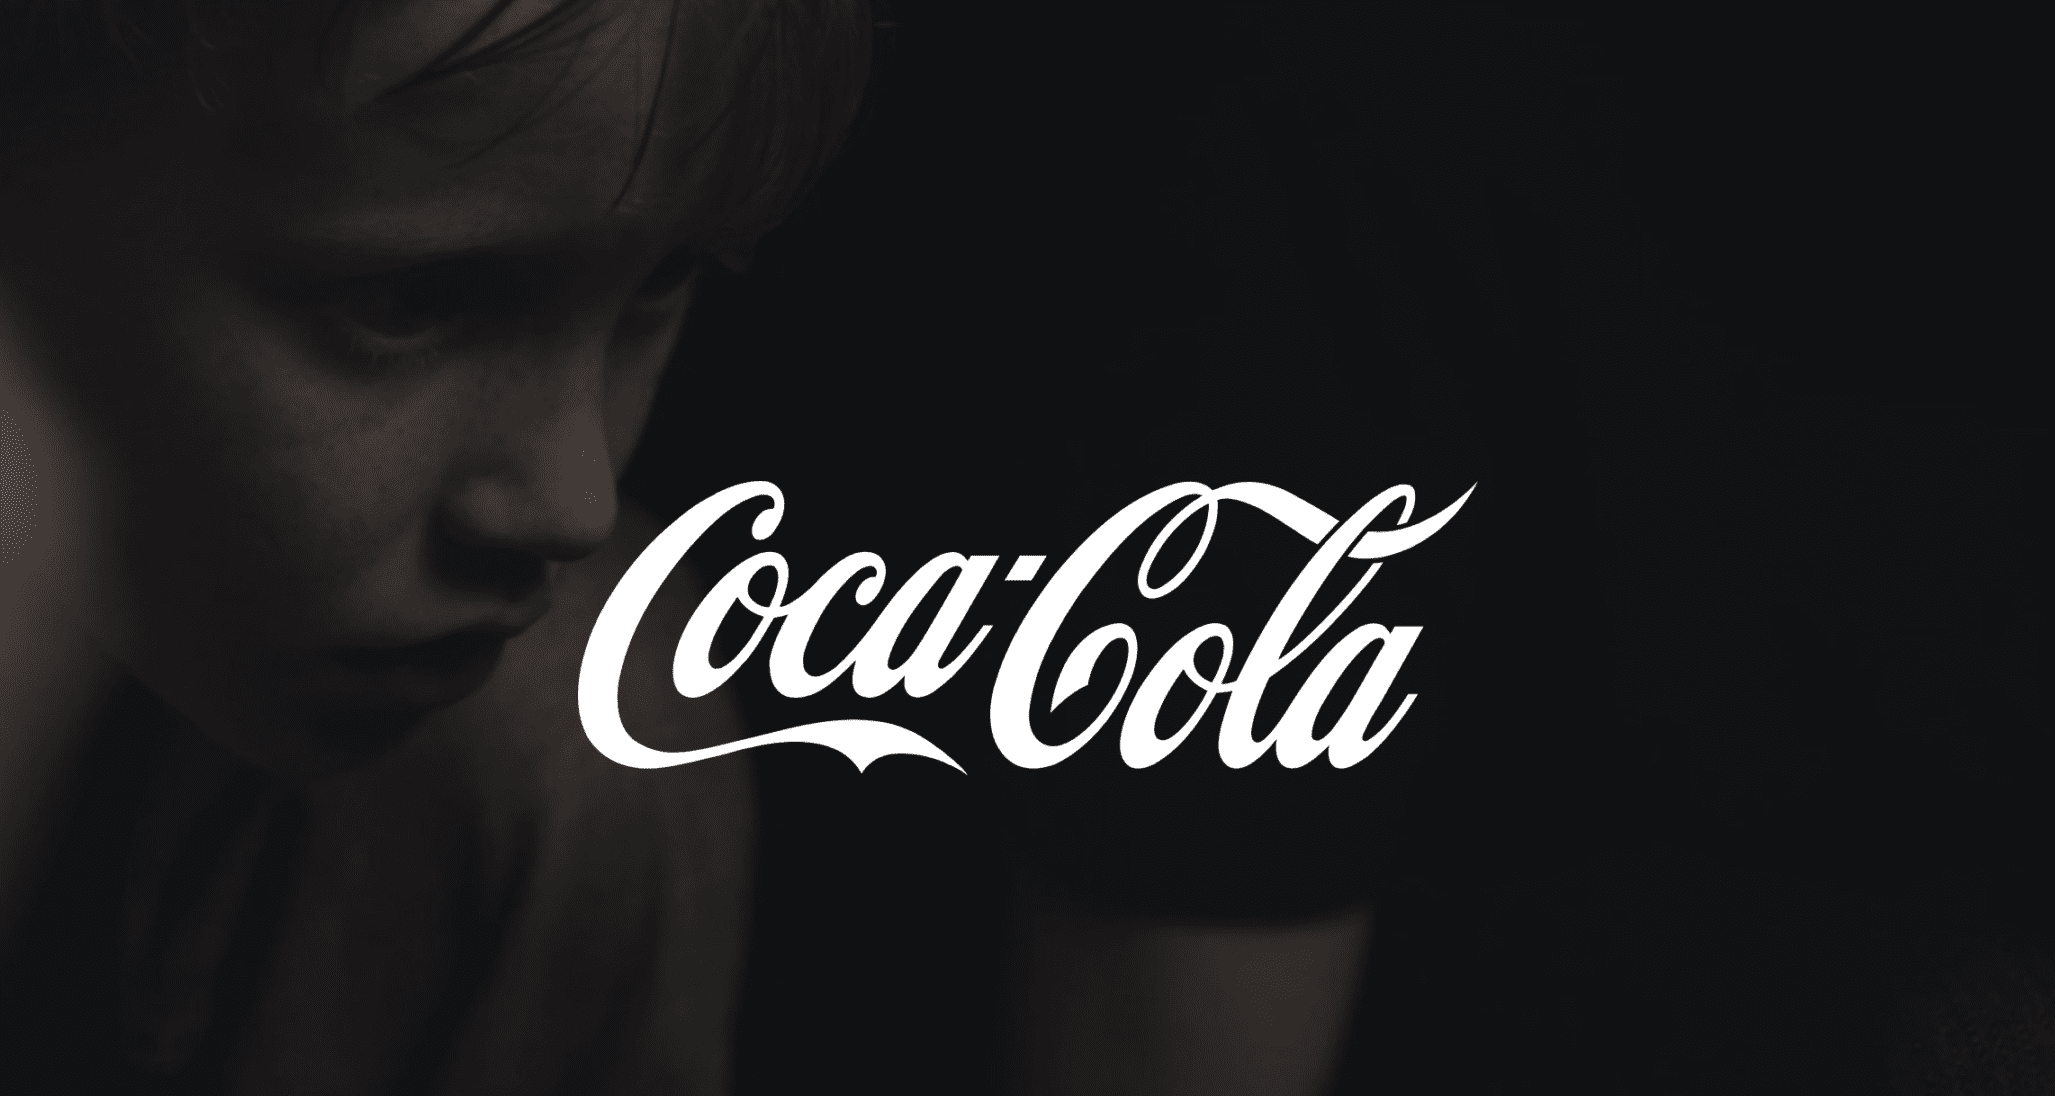 Professional Video Production Services by C&I Studios White Coca Cola logo against a dim background of a boy with freckles